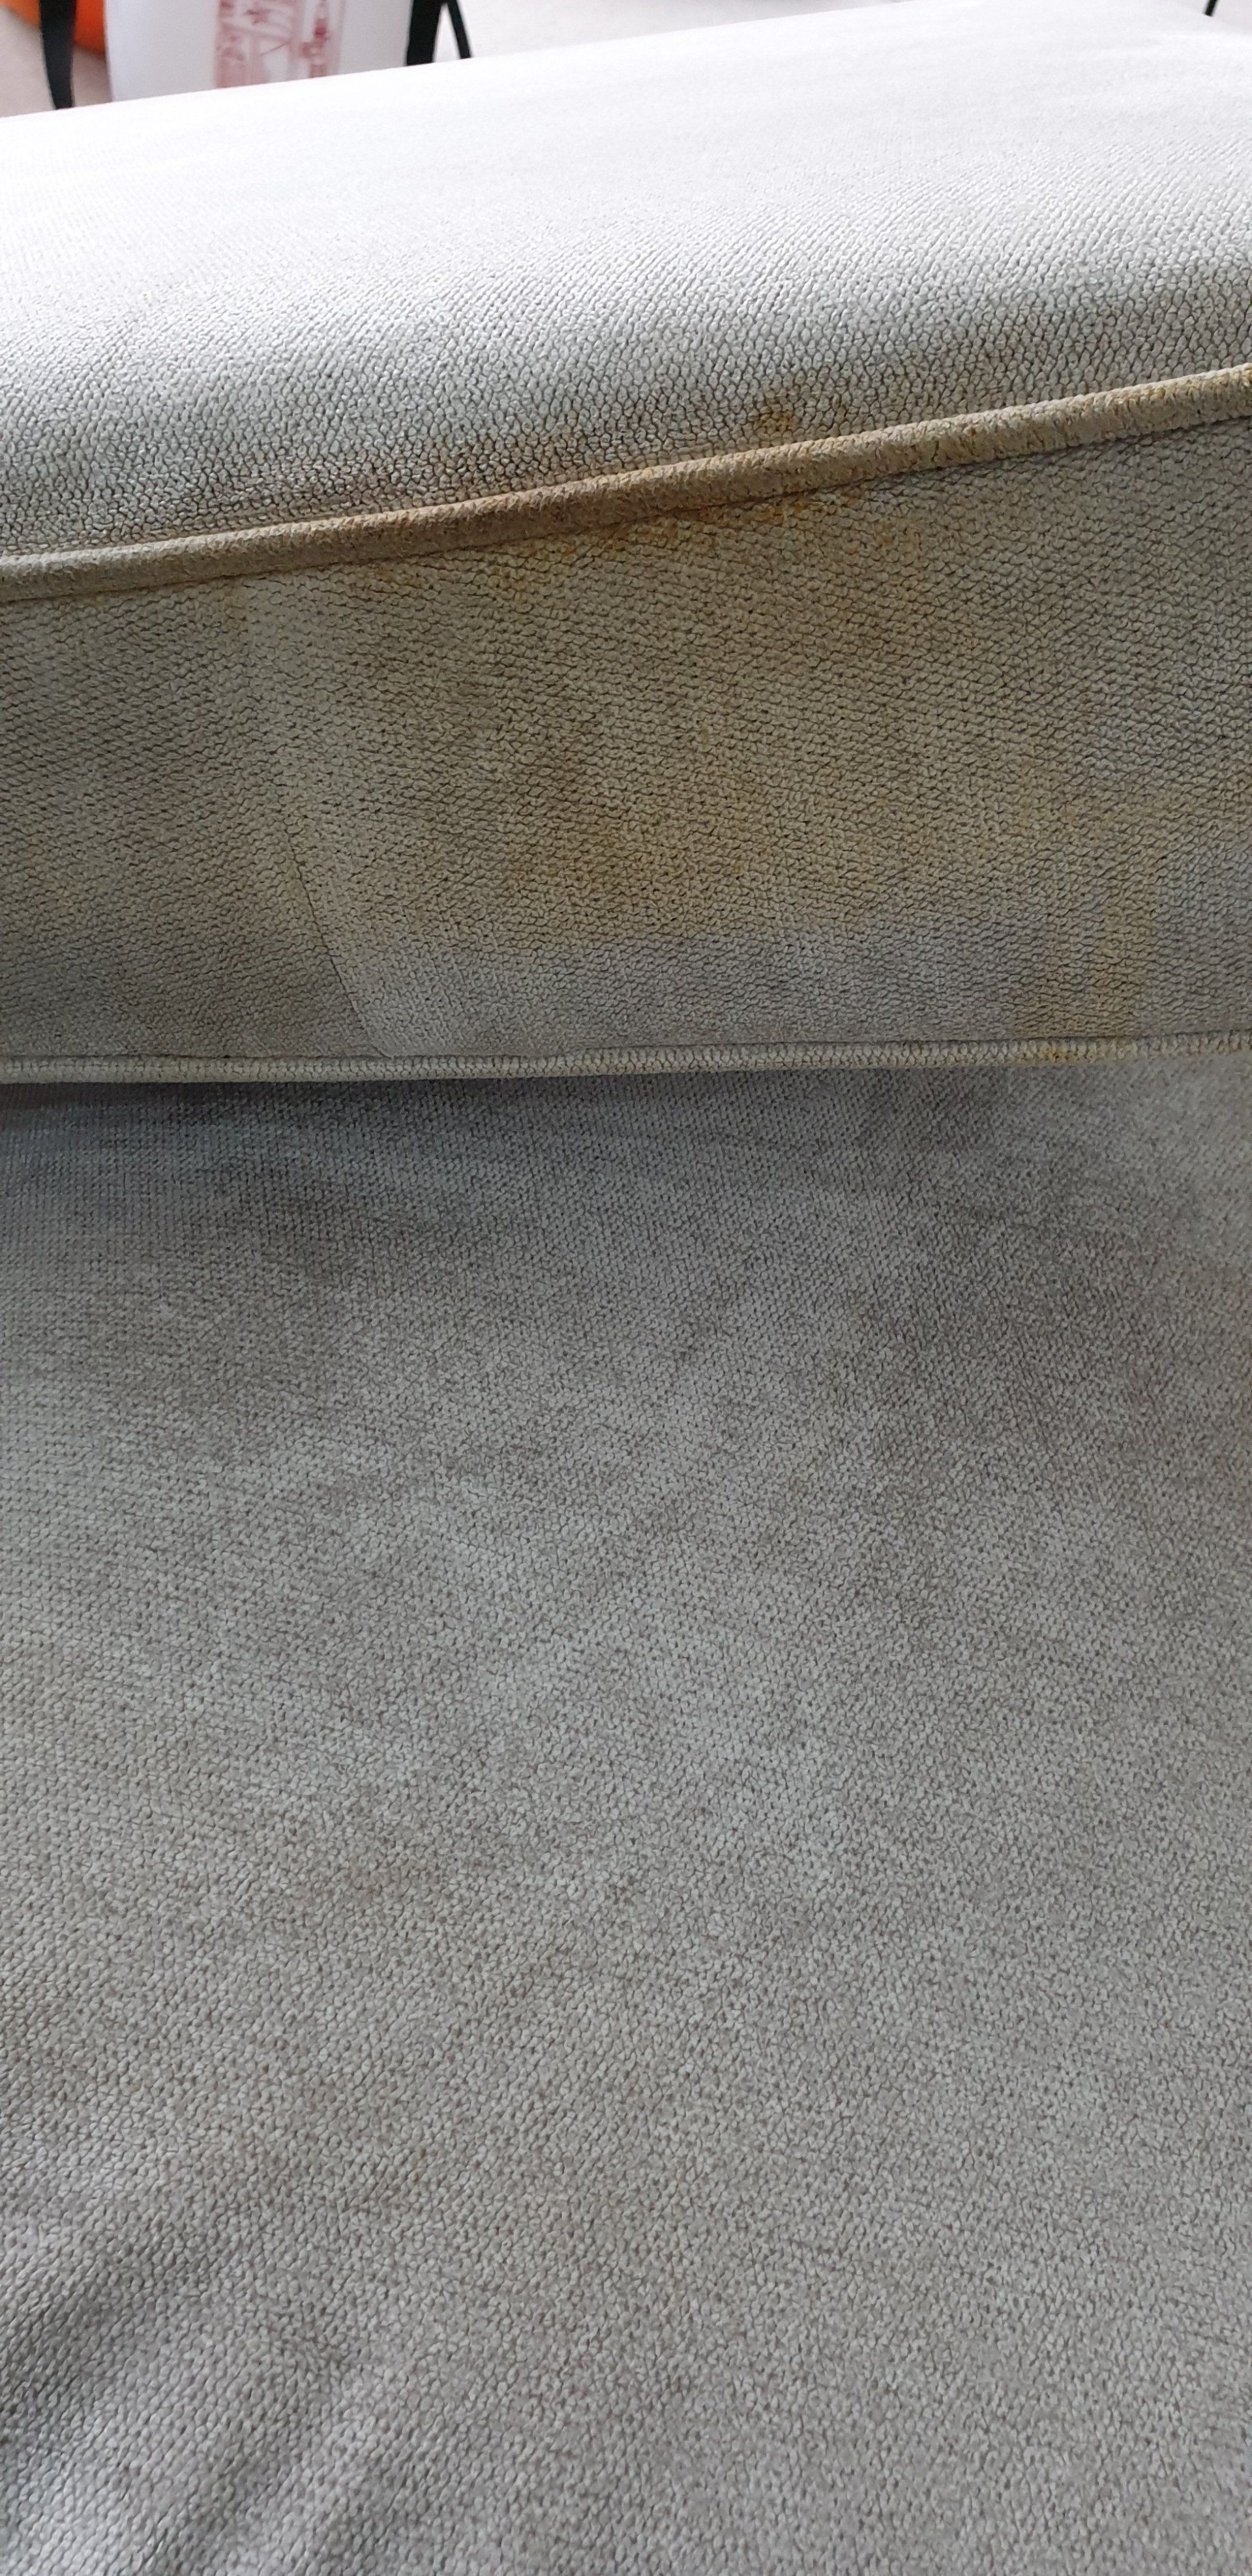 Upholstery before cleaning